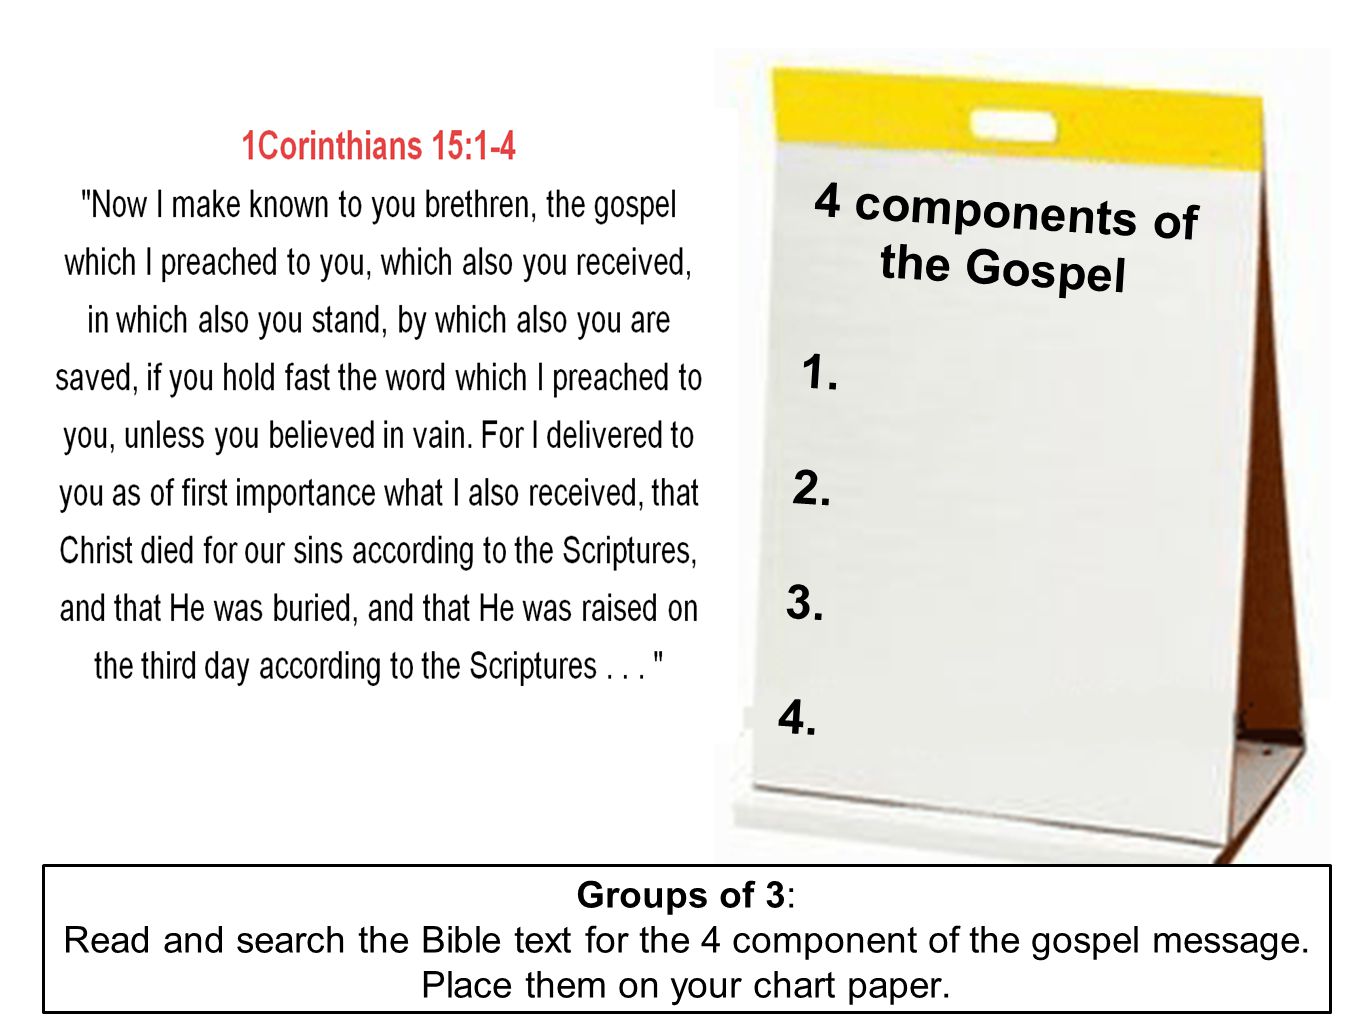 4 components of the Gospel